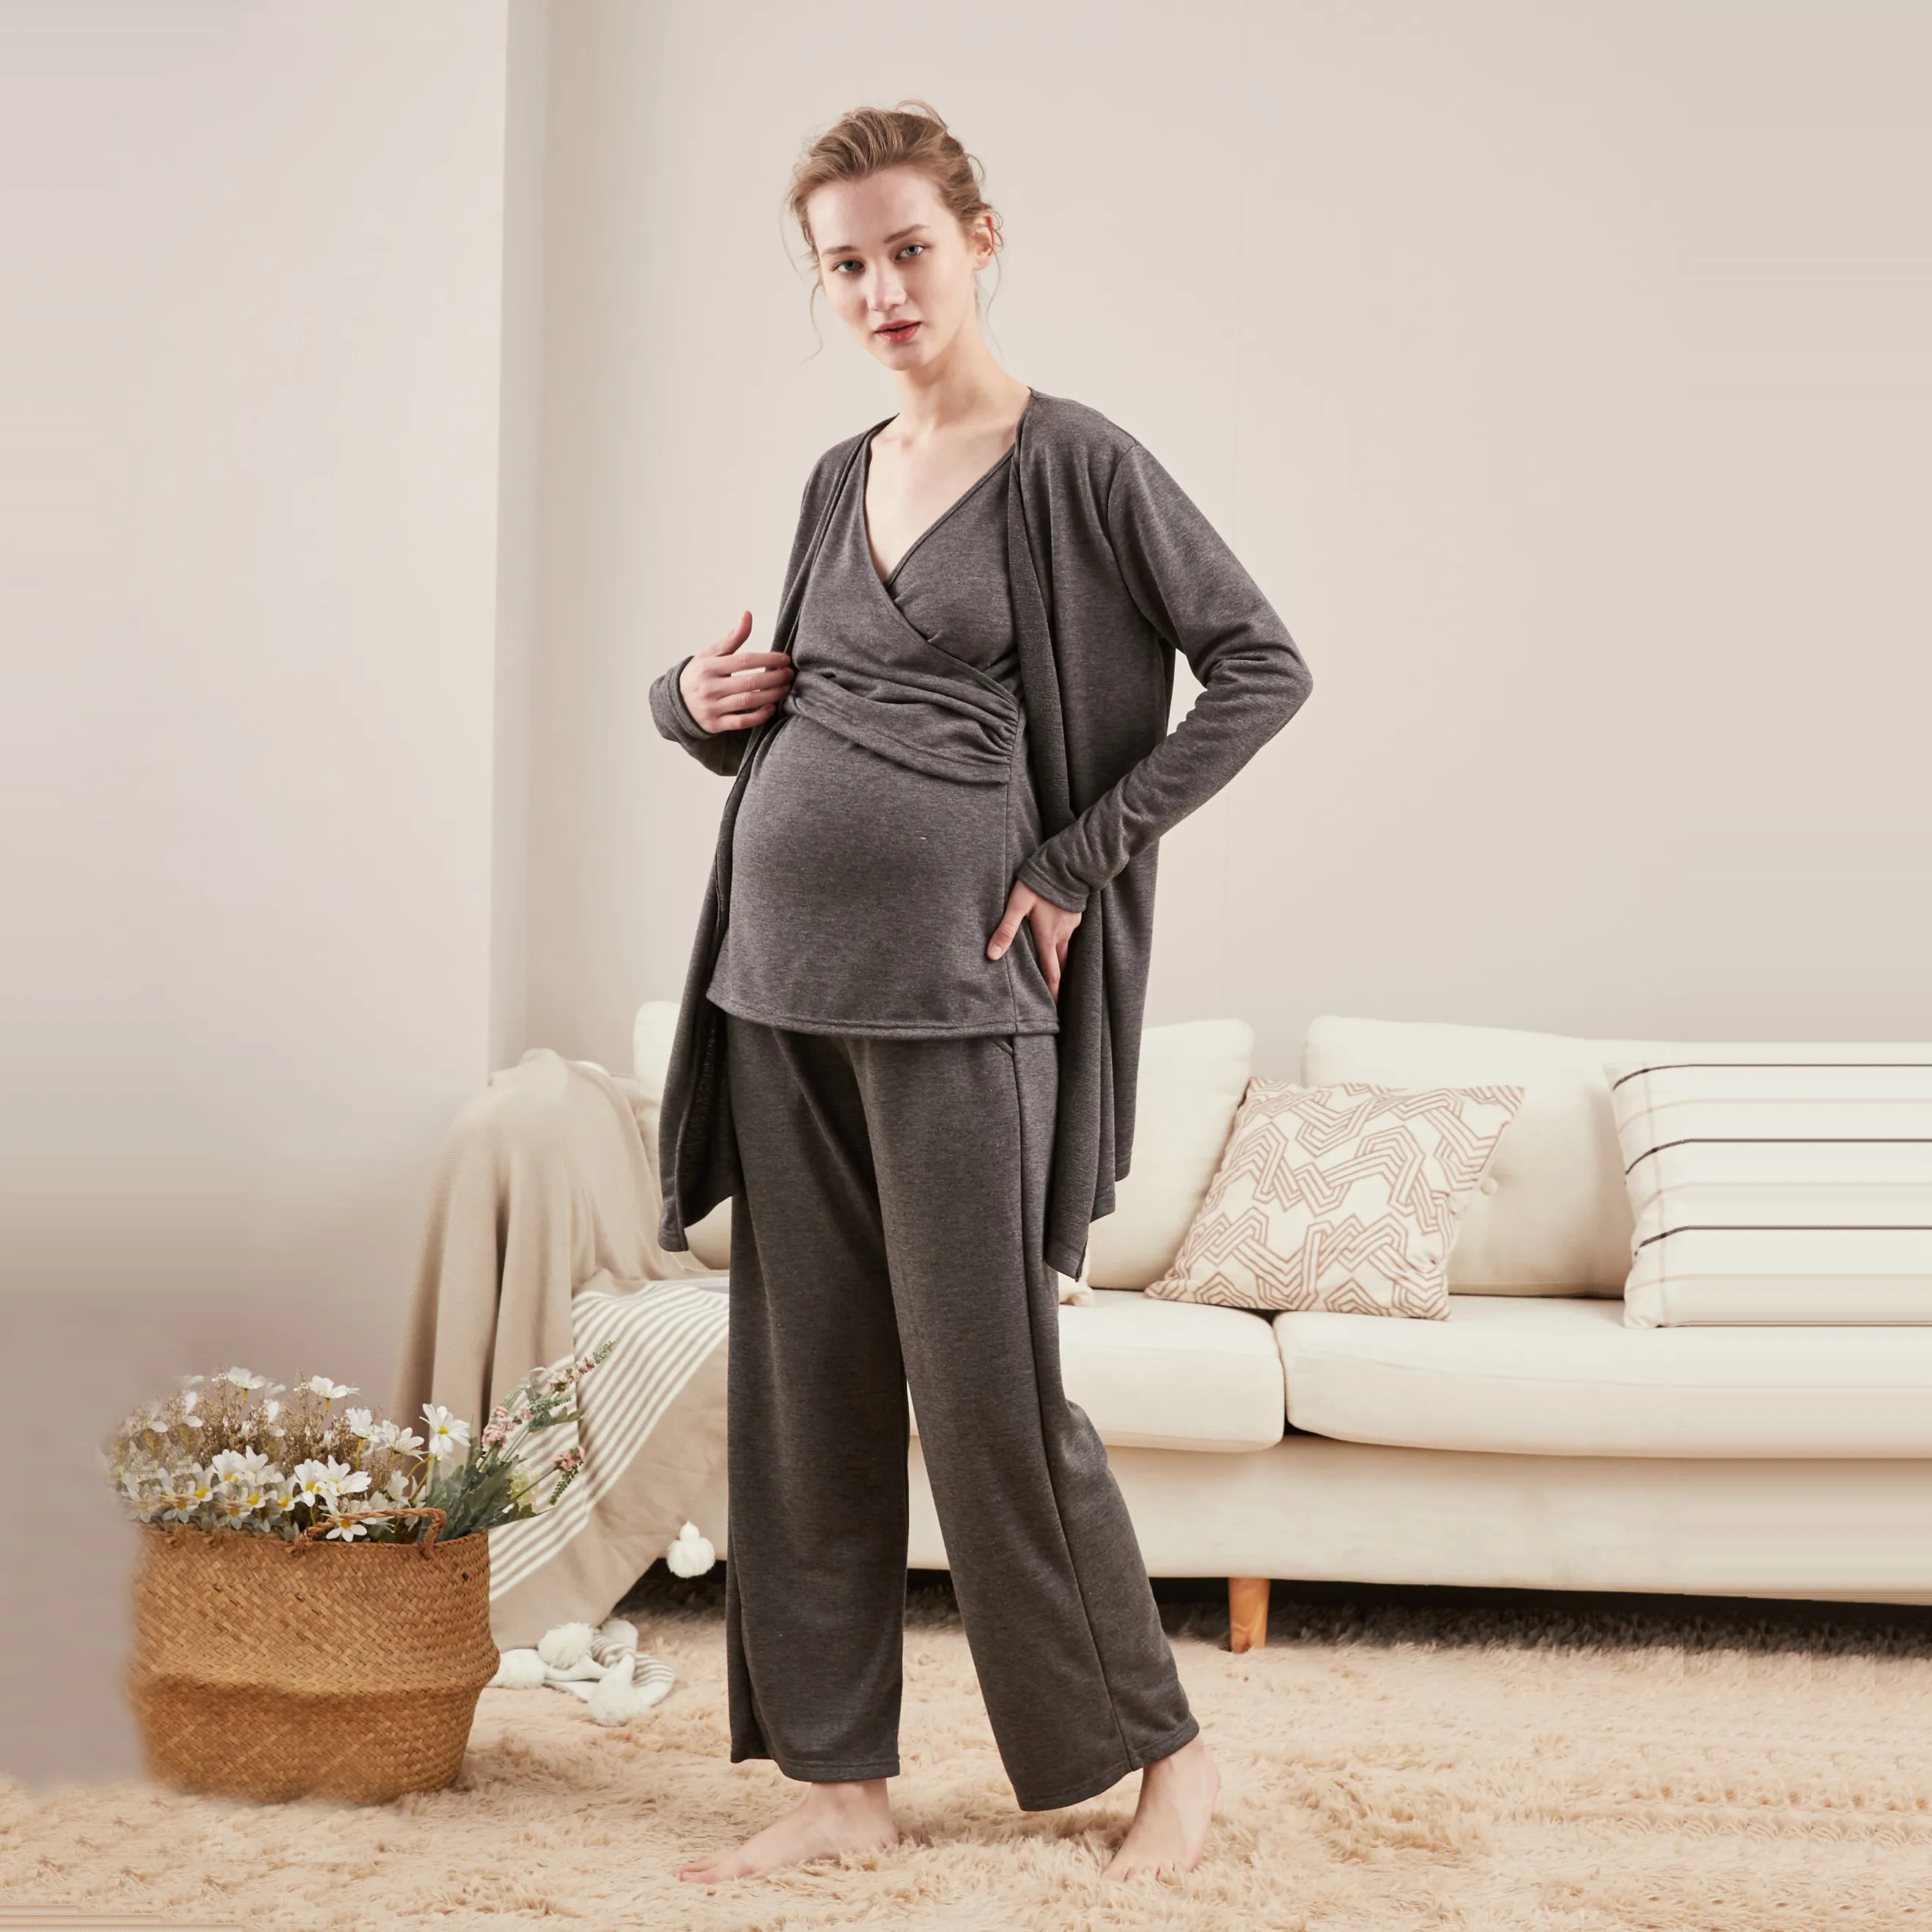 713896 Nursing office maternity wear set soft and cheap women maternity wear good quality pregnancy clothes set